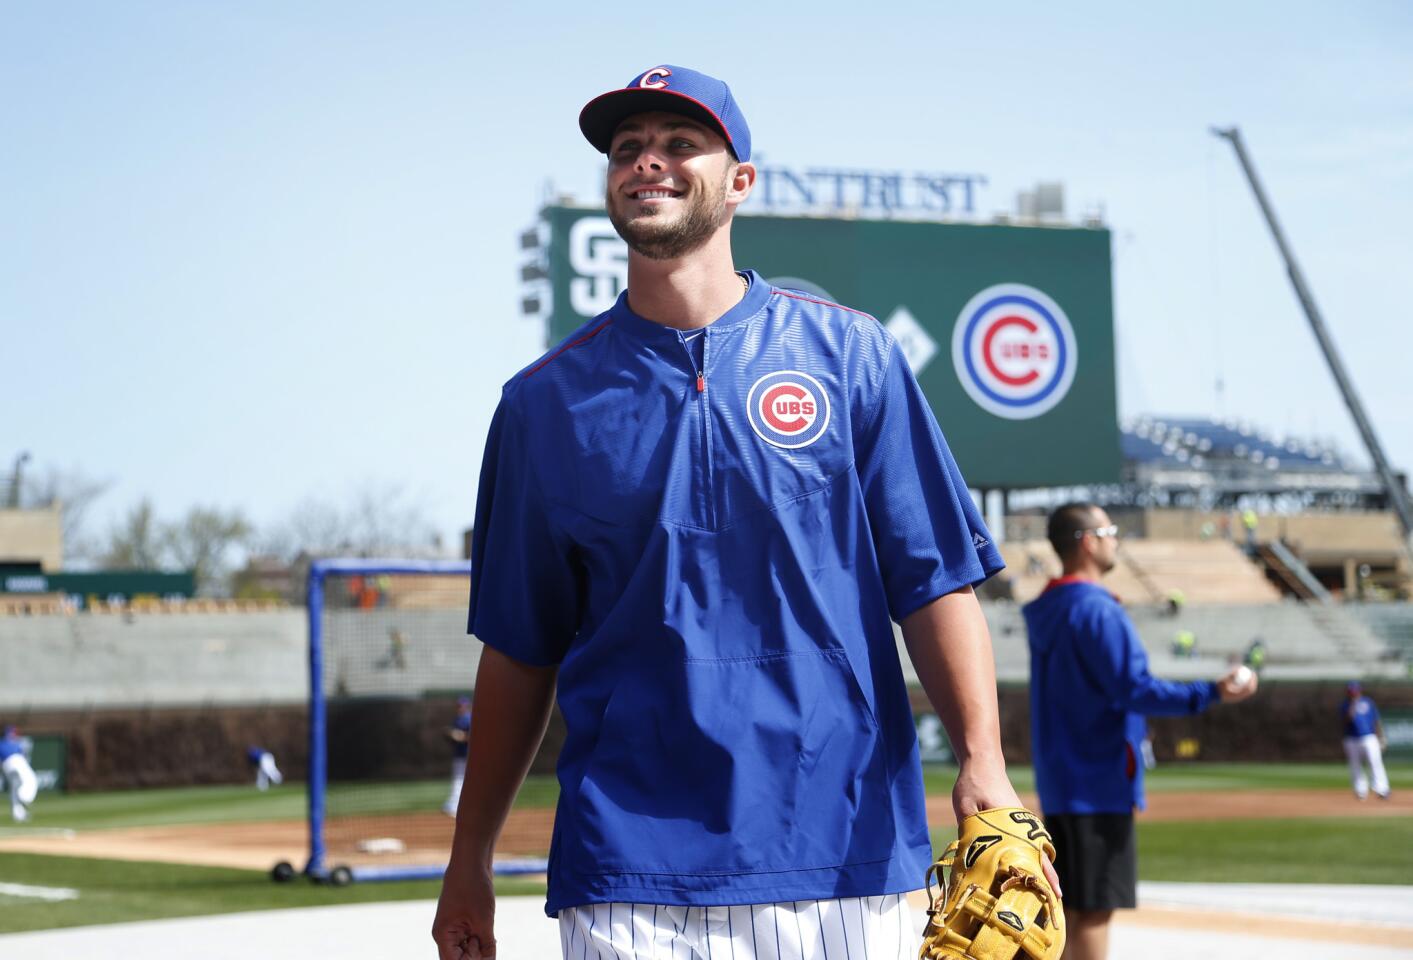 Many argued that top prospect Kris Bryant should have been the starting third baseman from opening day. Nevertheless, the Cubs called him up from Triple-A Iowa to make his major-league debut against the Padres at Wrigley Field. He went 0-for-4 with three strikeouts in a 5-4 loss but quickly showed he could be a perennial All-Star based on his power and athletic ability.